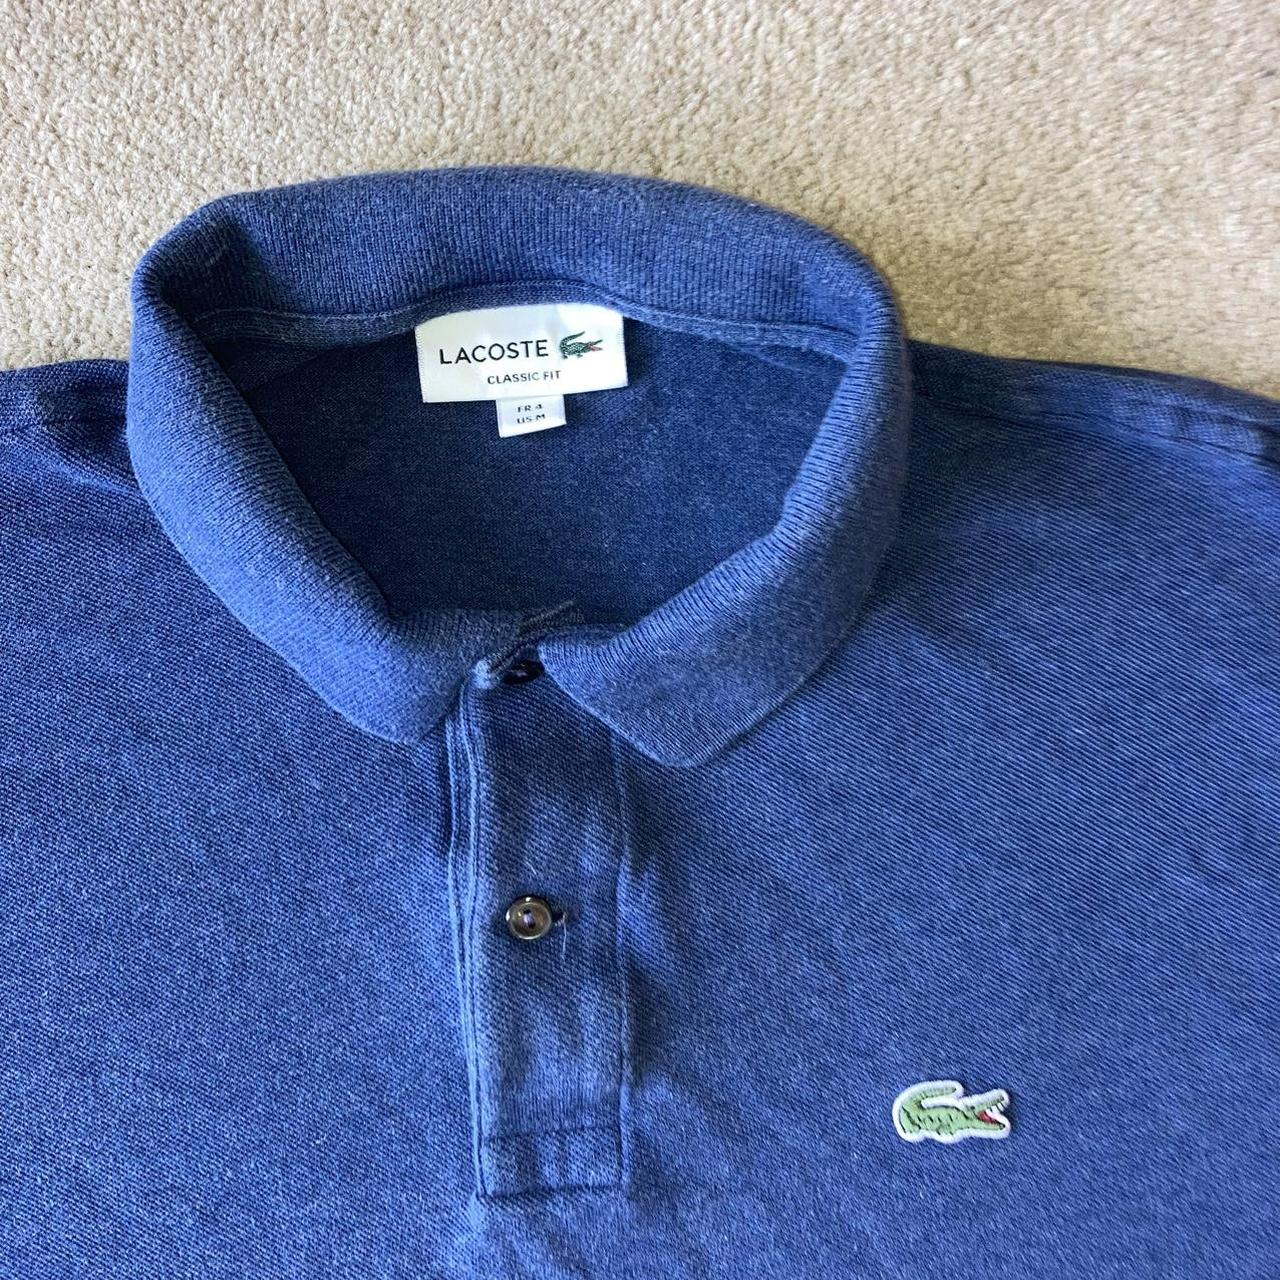 Y2K lacoste polo shirt Lacoste polo shirt with... - Depop